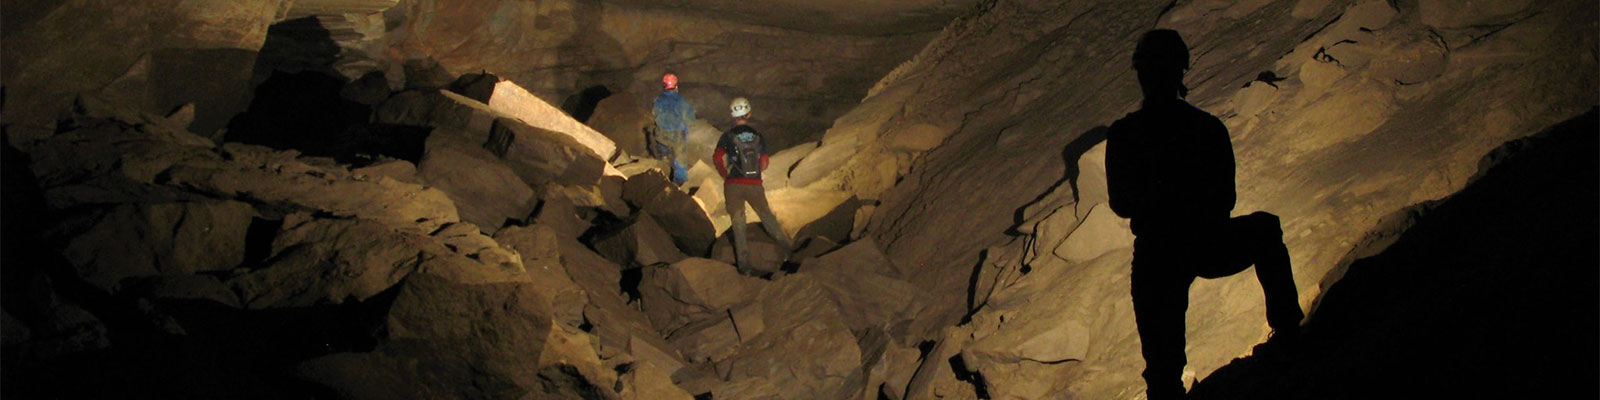 people in cave